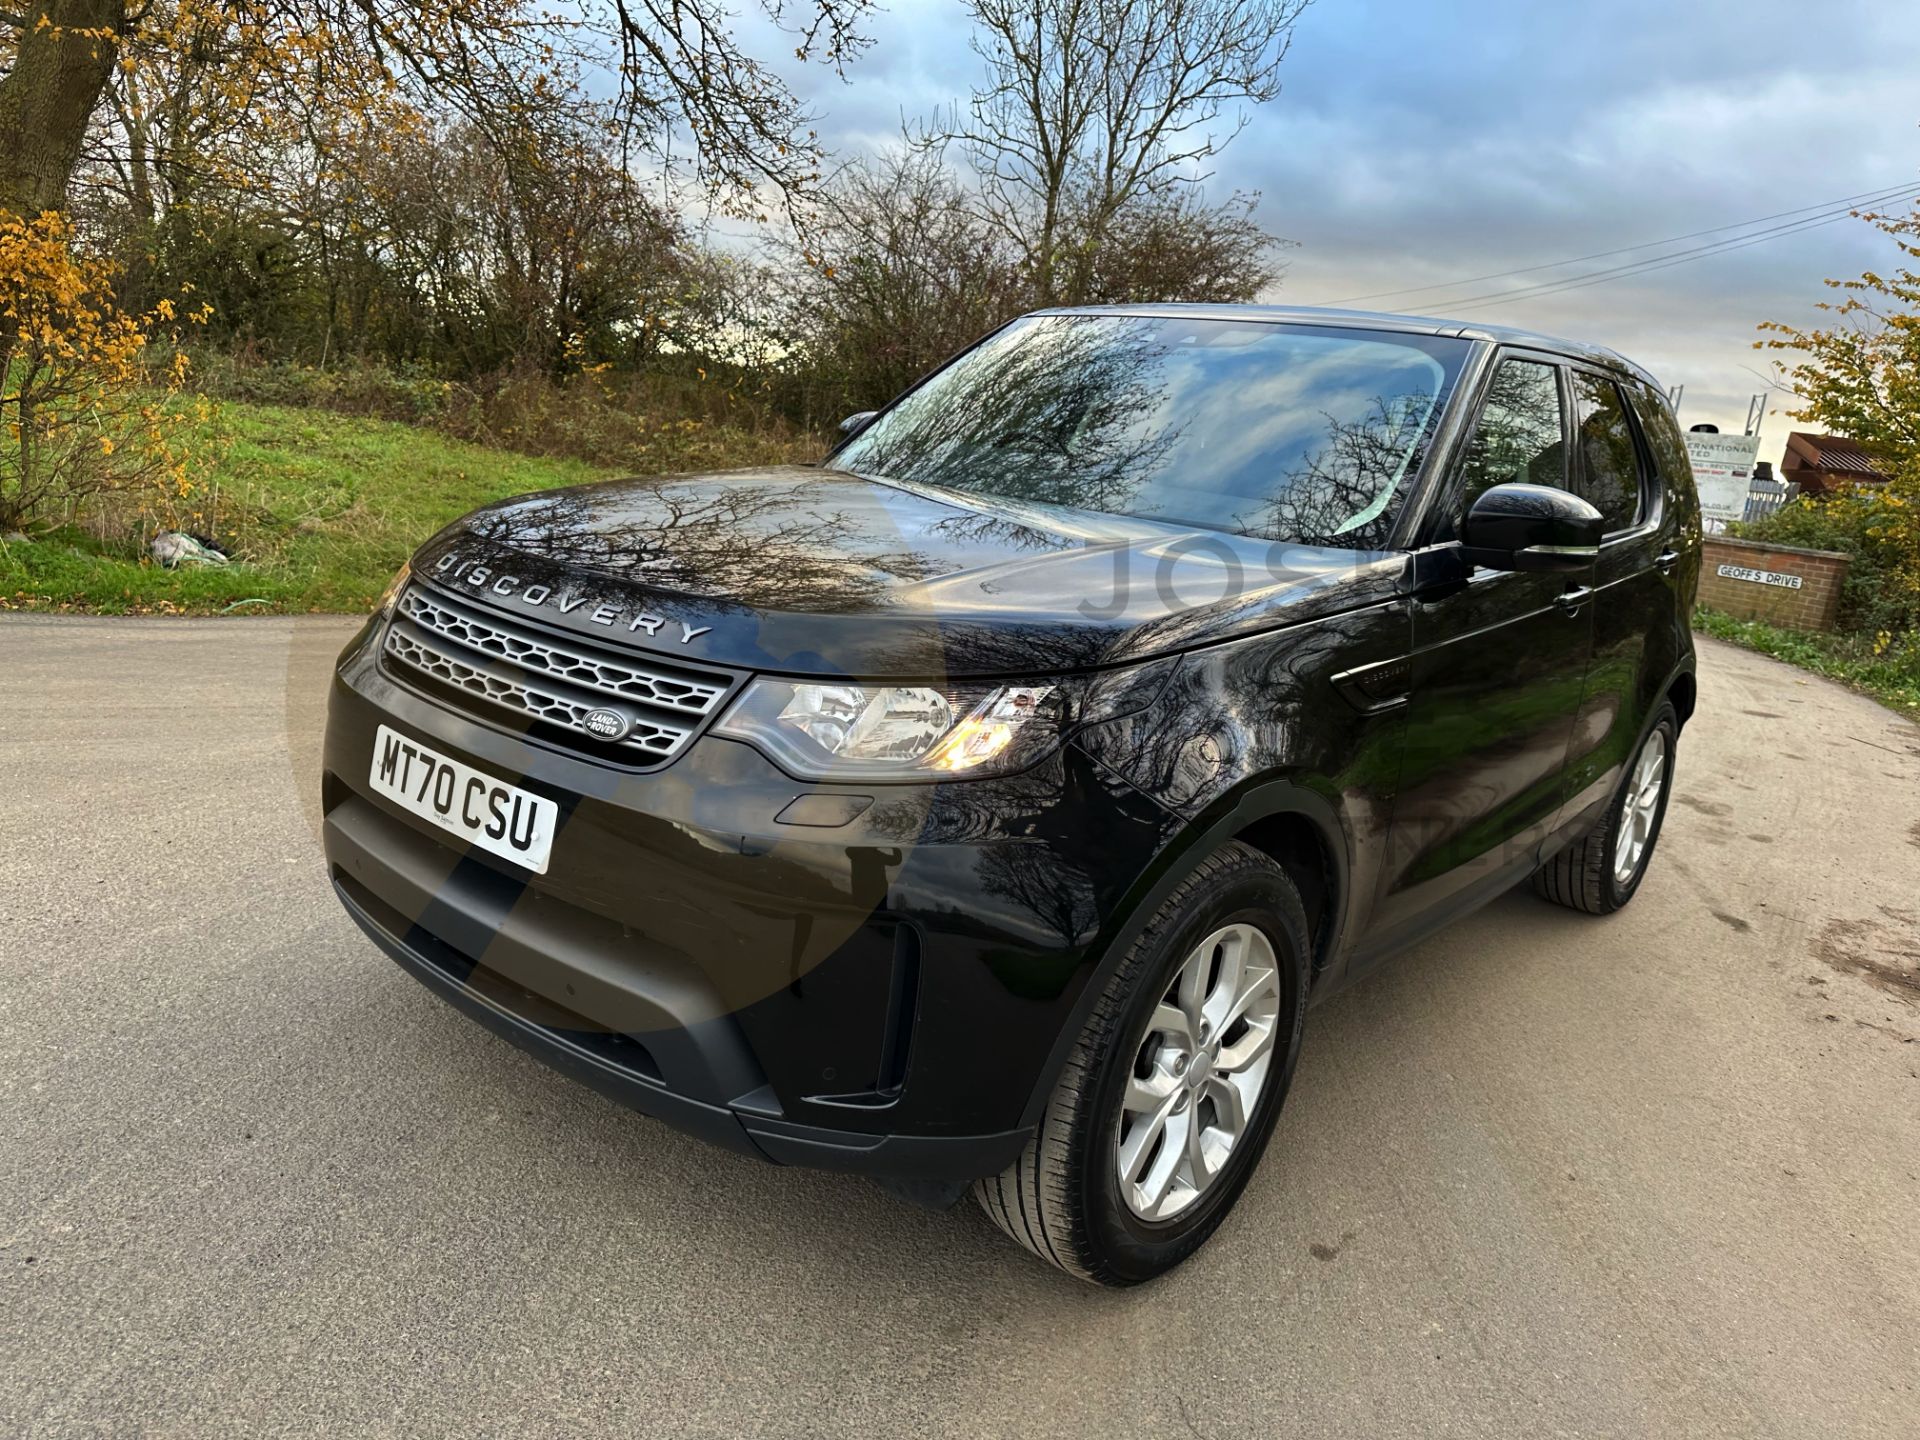 LAND ROVER DISCOVERY 5 *ALL NEW MODEL* (2021 - EURO 6) 8 SPEED AUTO (1 OWNER) *ONLY 19,000 MILES* - Image 5 of 50